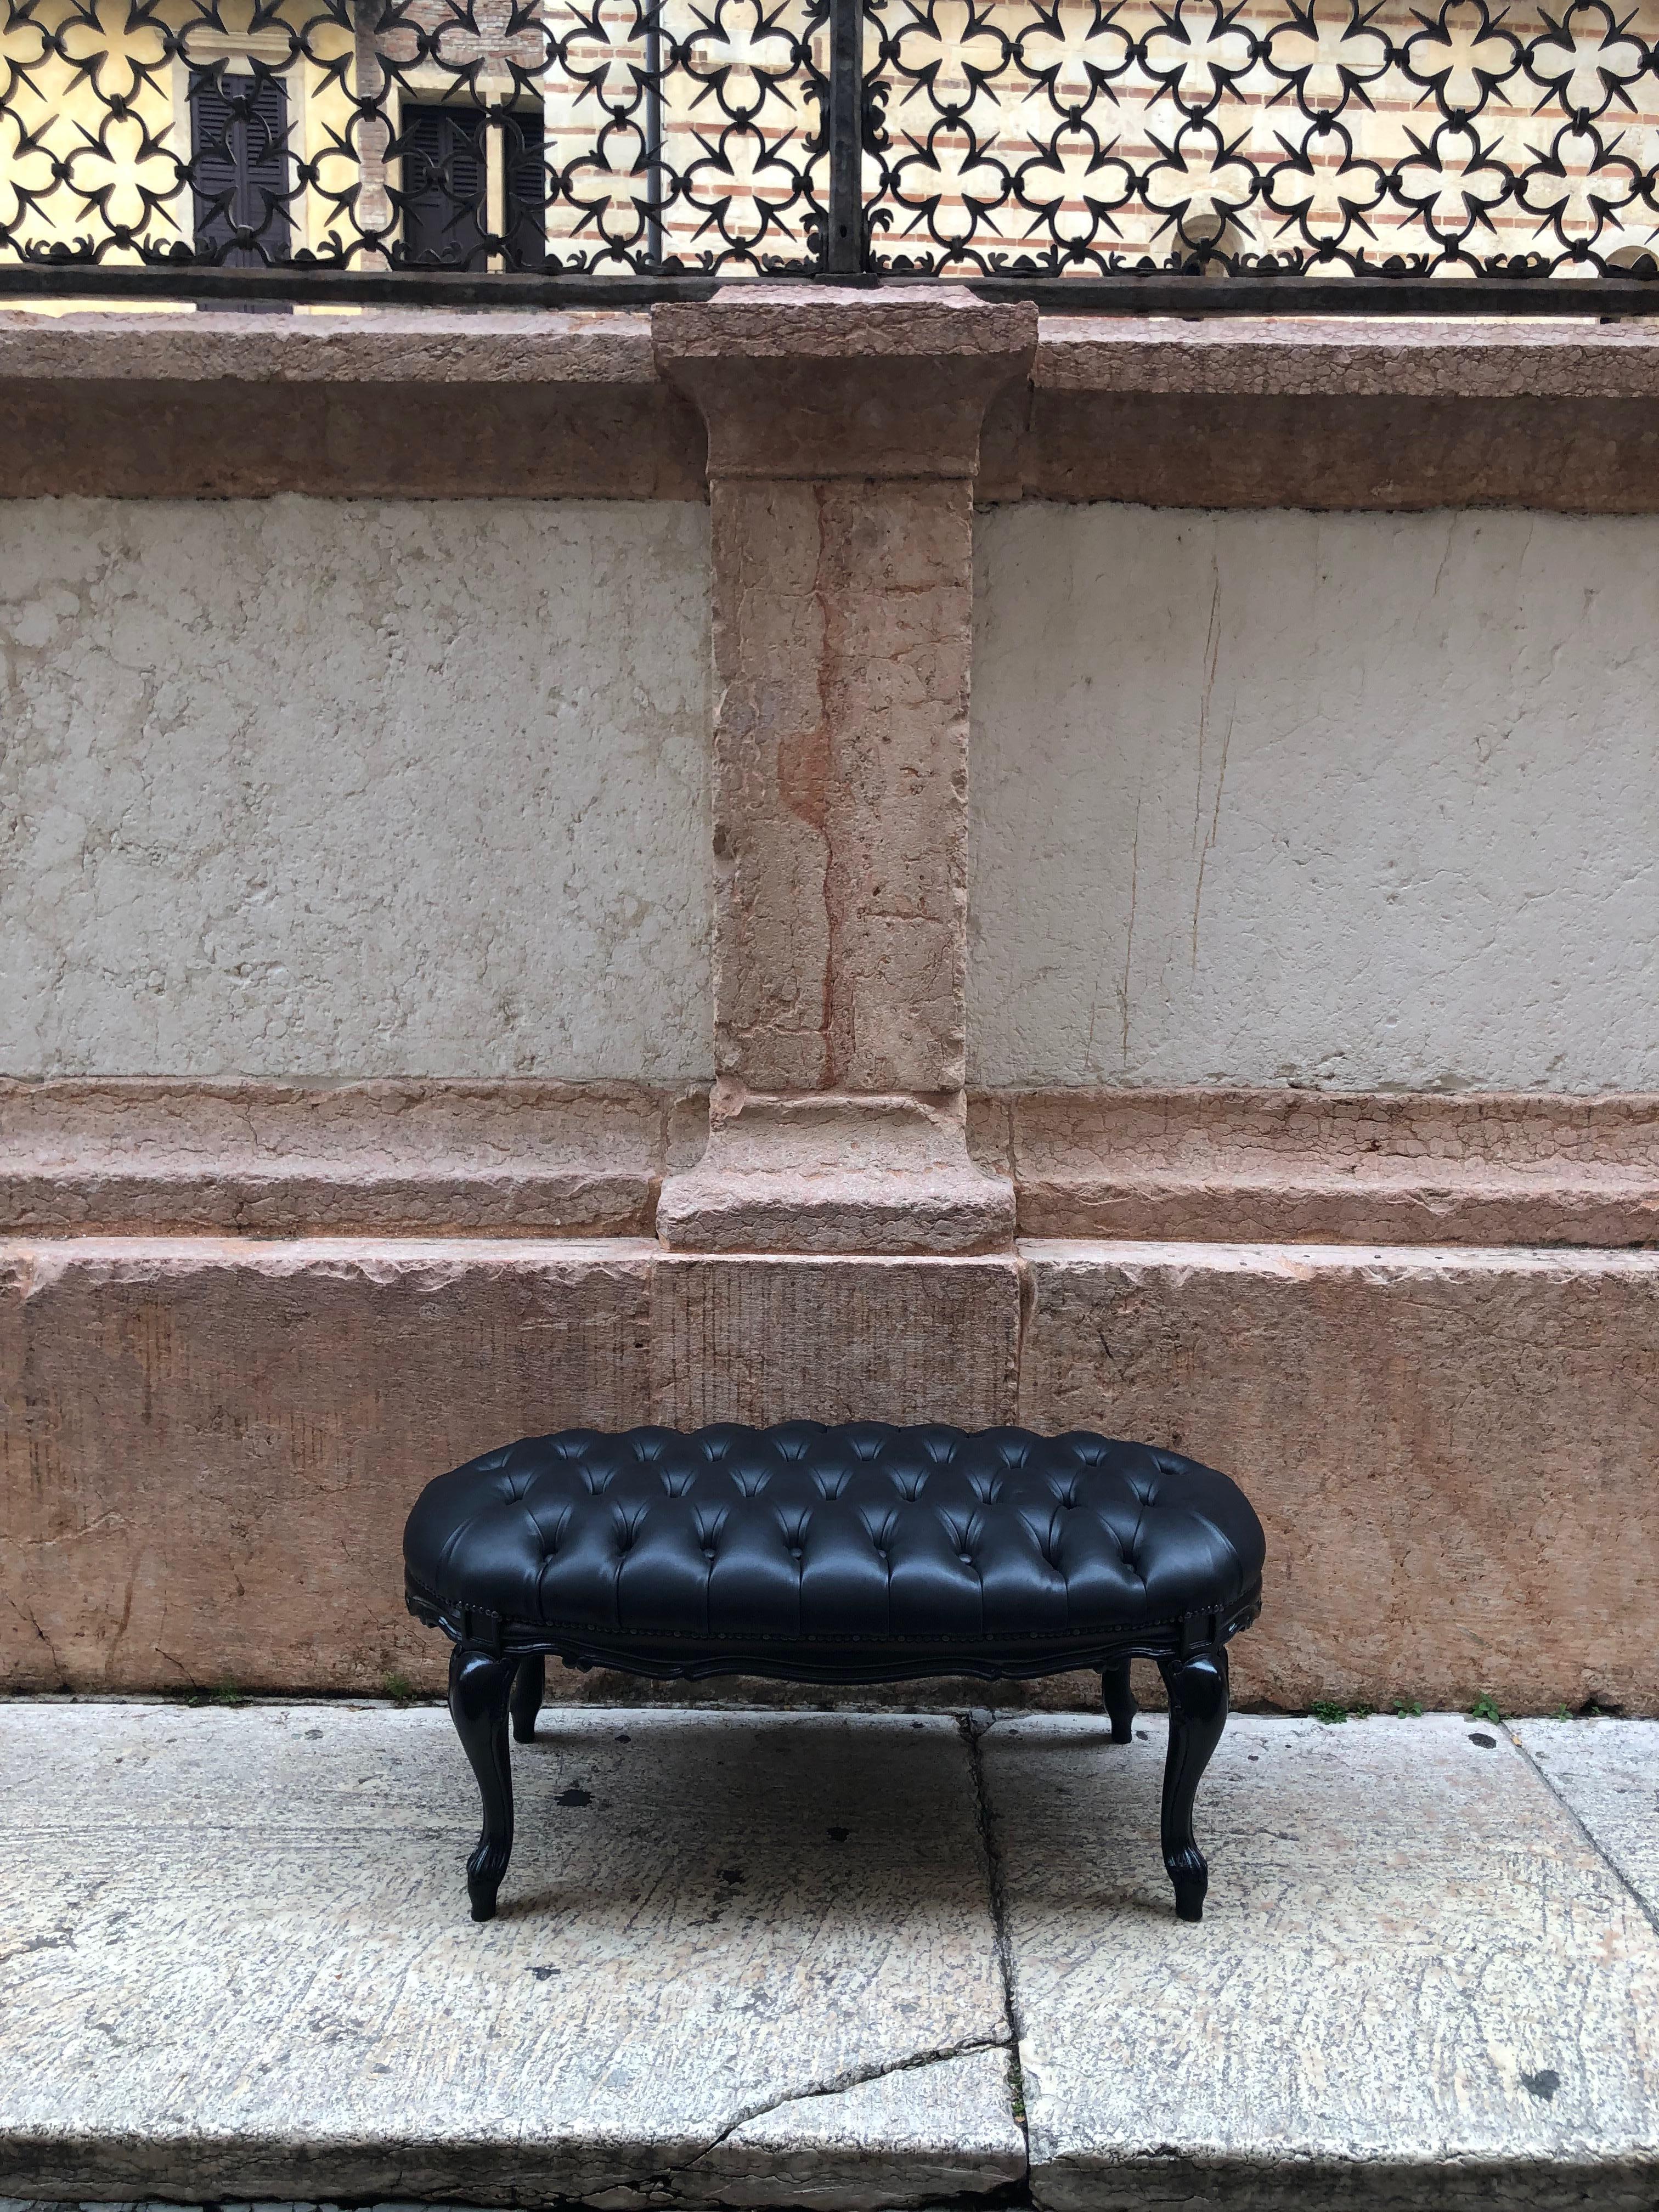 Midcentury Italian black lacquered engraved wood black leather oval bench. From Italy, from 1950s. Ideal as bench along a corridor, at the end of a bed, at the entrance.
Excellent conditions. Wooden part restored in conservative way, reupholstered